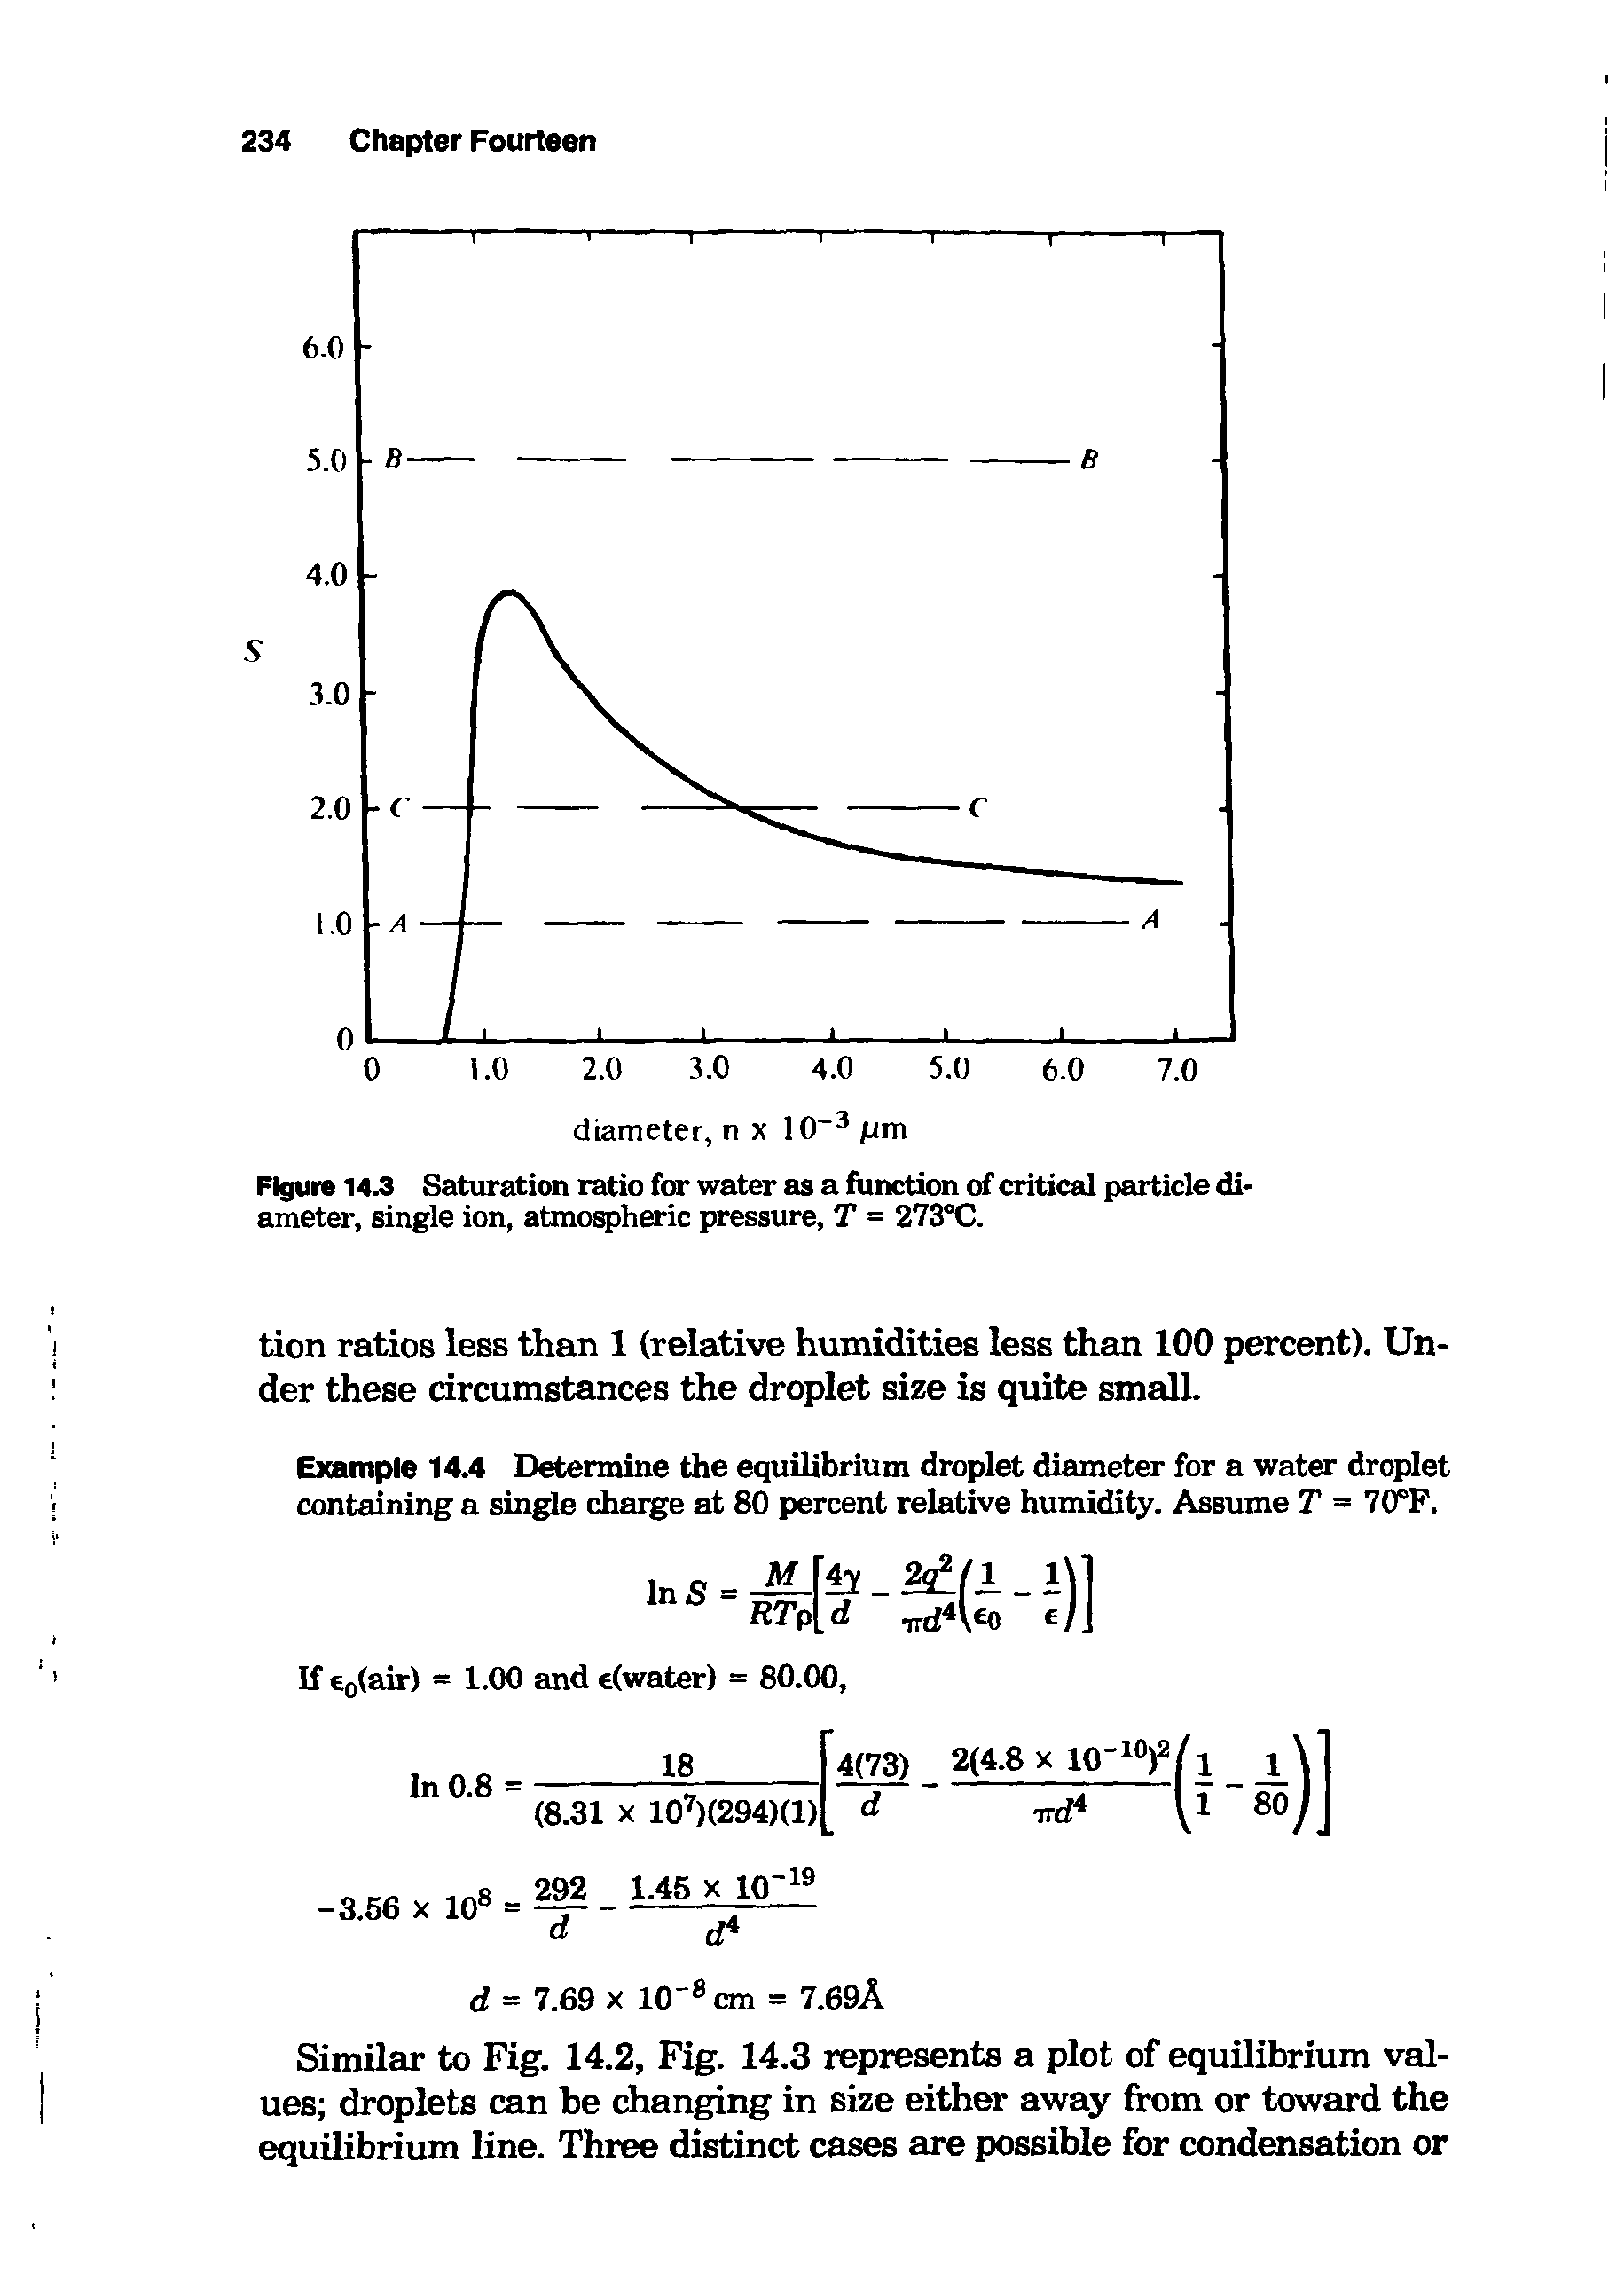 Figure 14.3 Saturation ratio for water as a function of critical particle diameter, single ion, atmospheric pressure, T = 273°C.